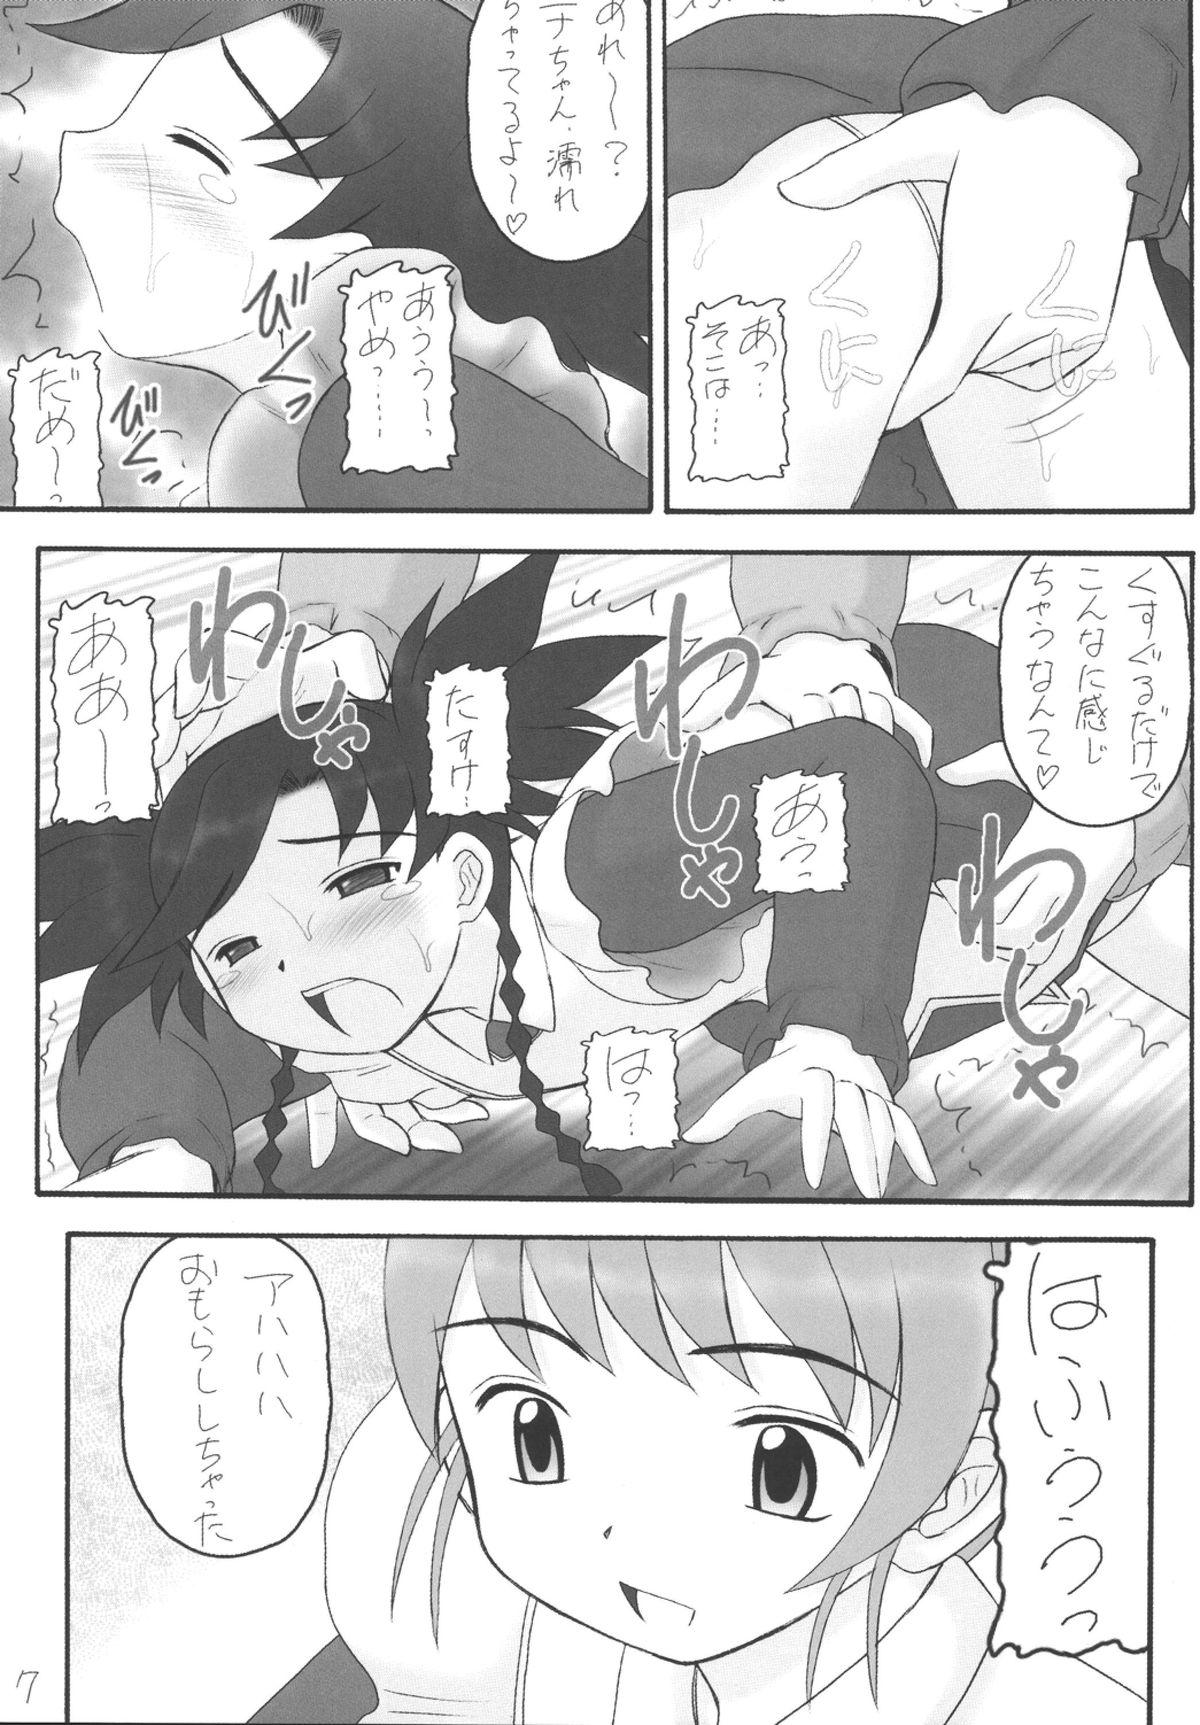 Gaystraight My Hime - Mai-otome Movie - Page 7